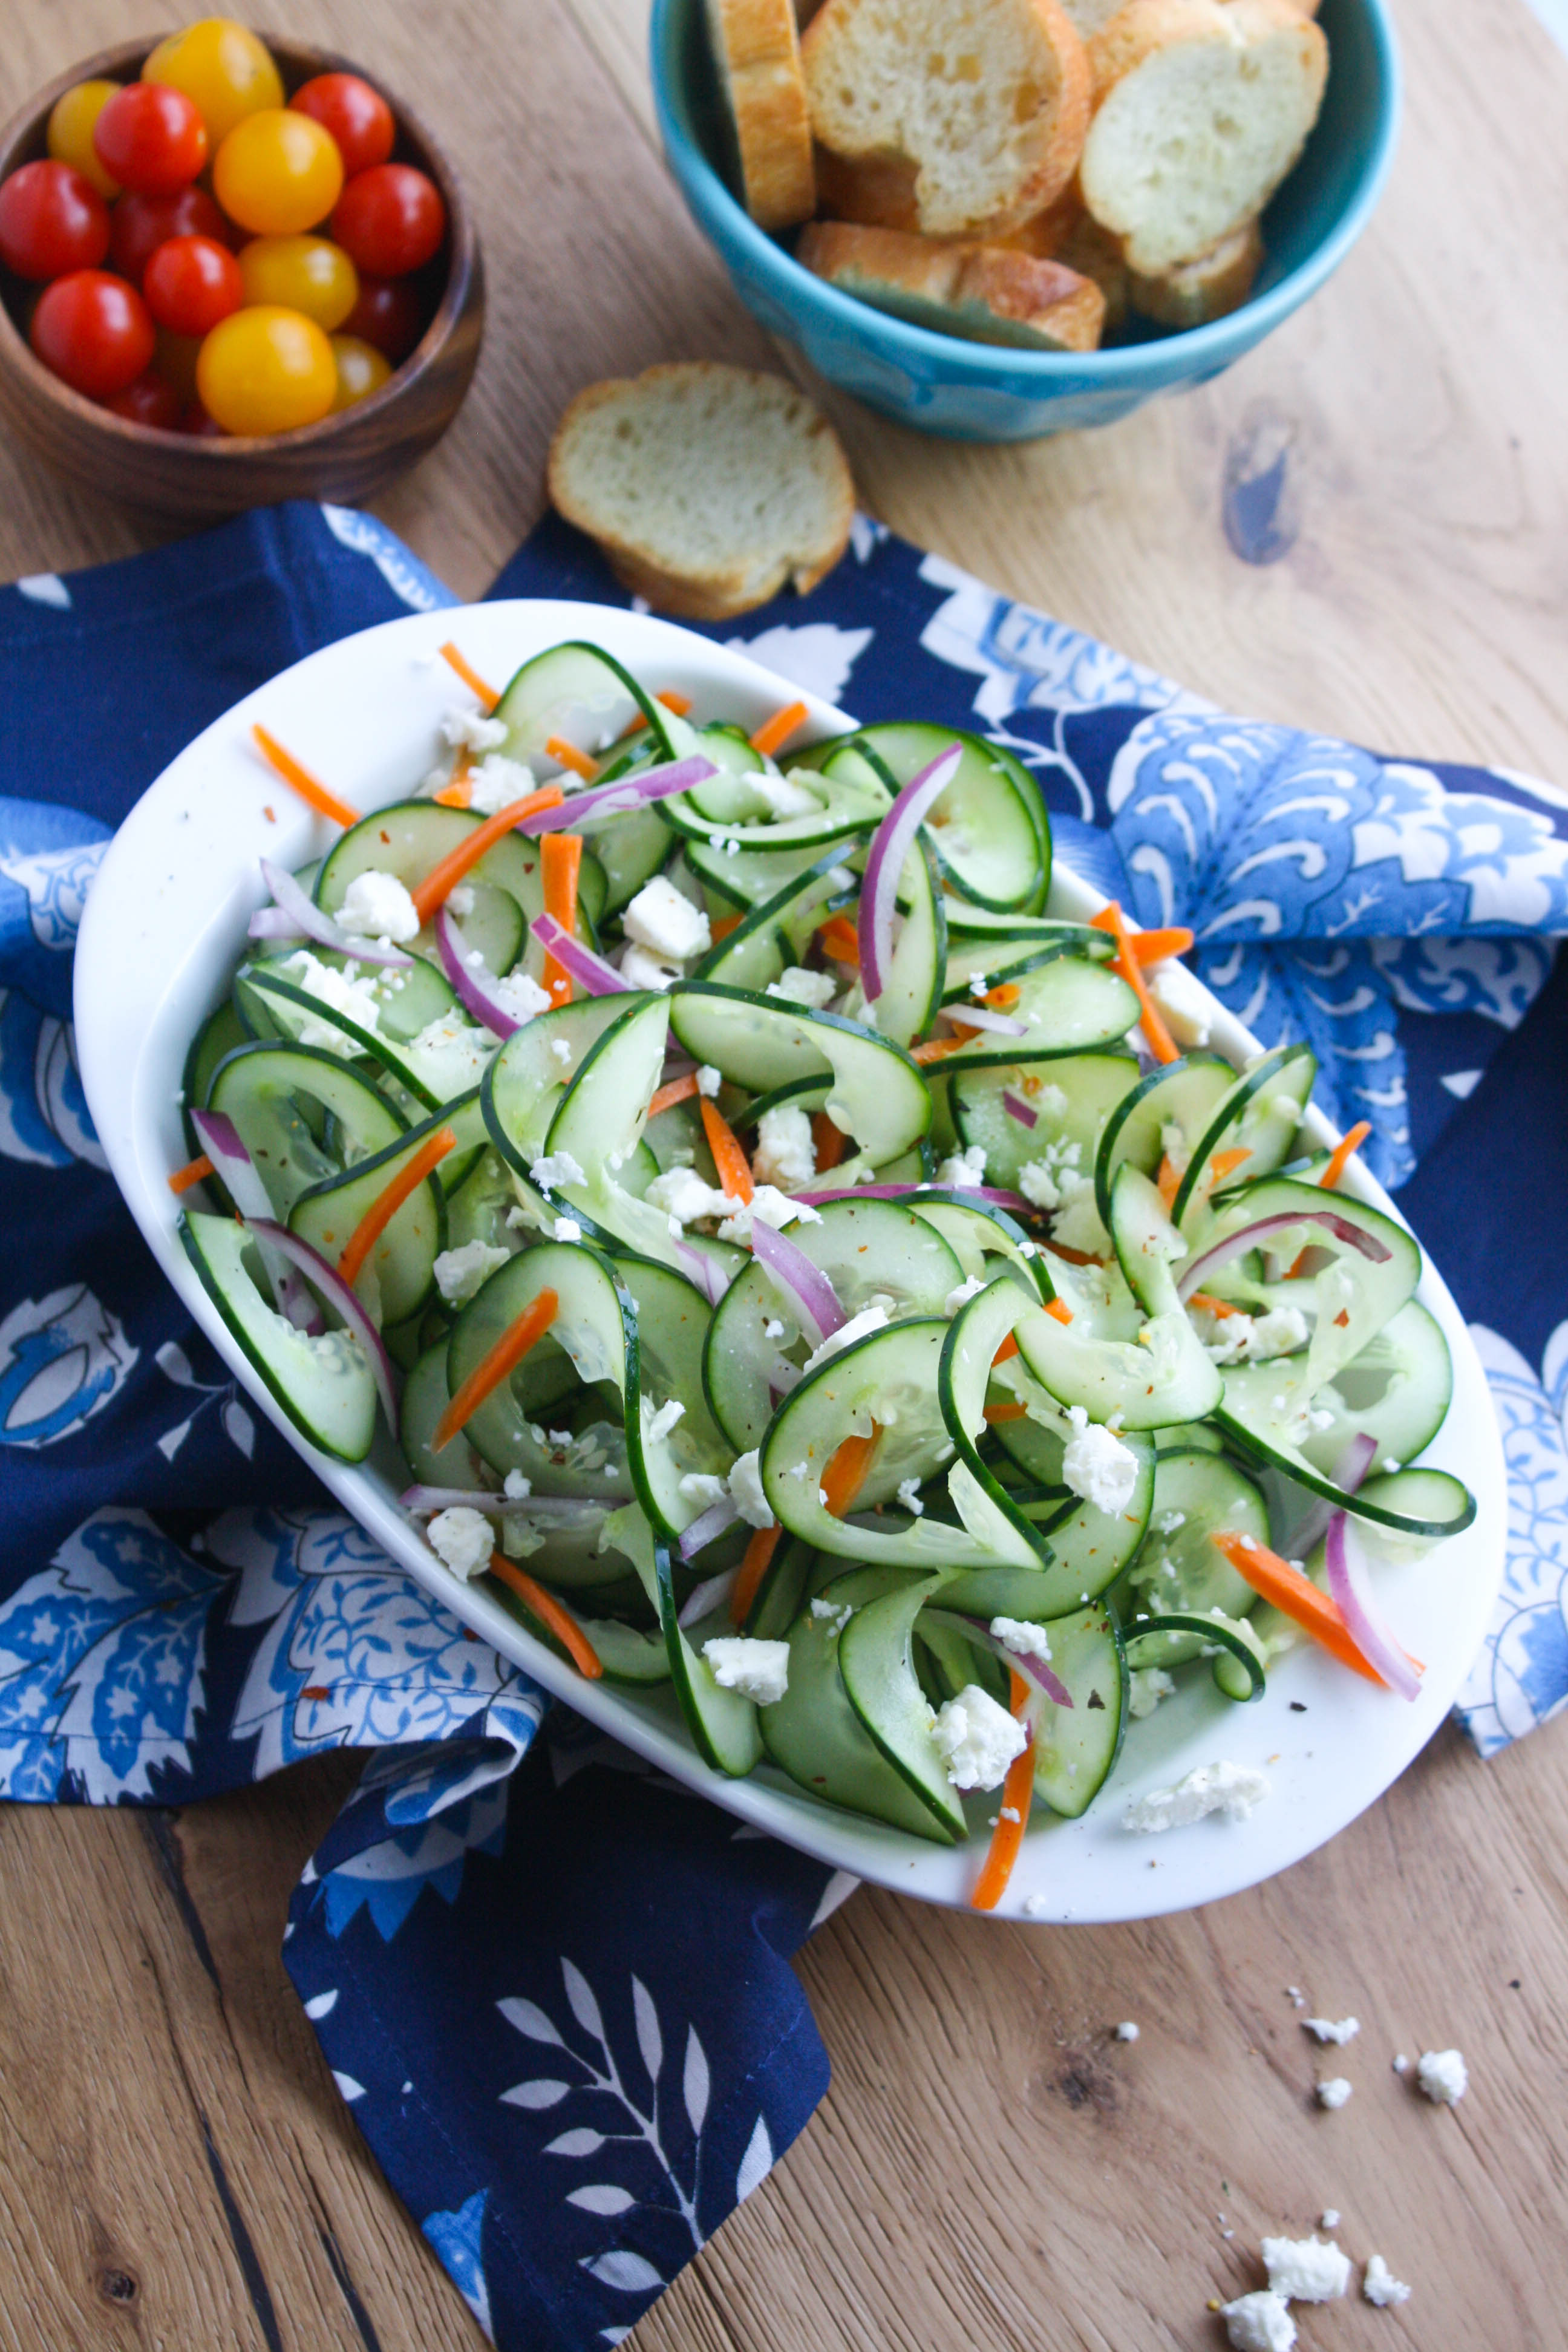 Sweet and Tangy Cucumber Ribbon Salad is a fabulous side dish for any meal. This simple salad is so easy to make.